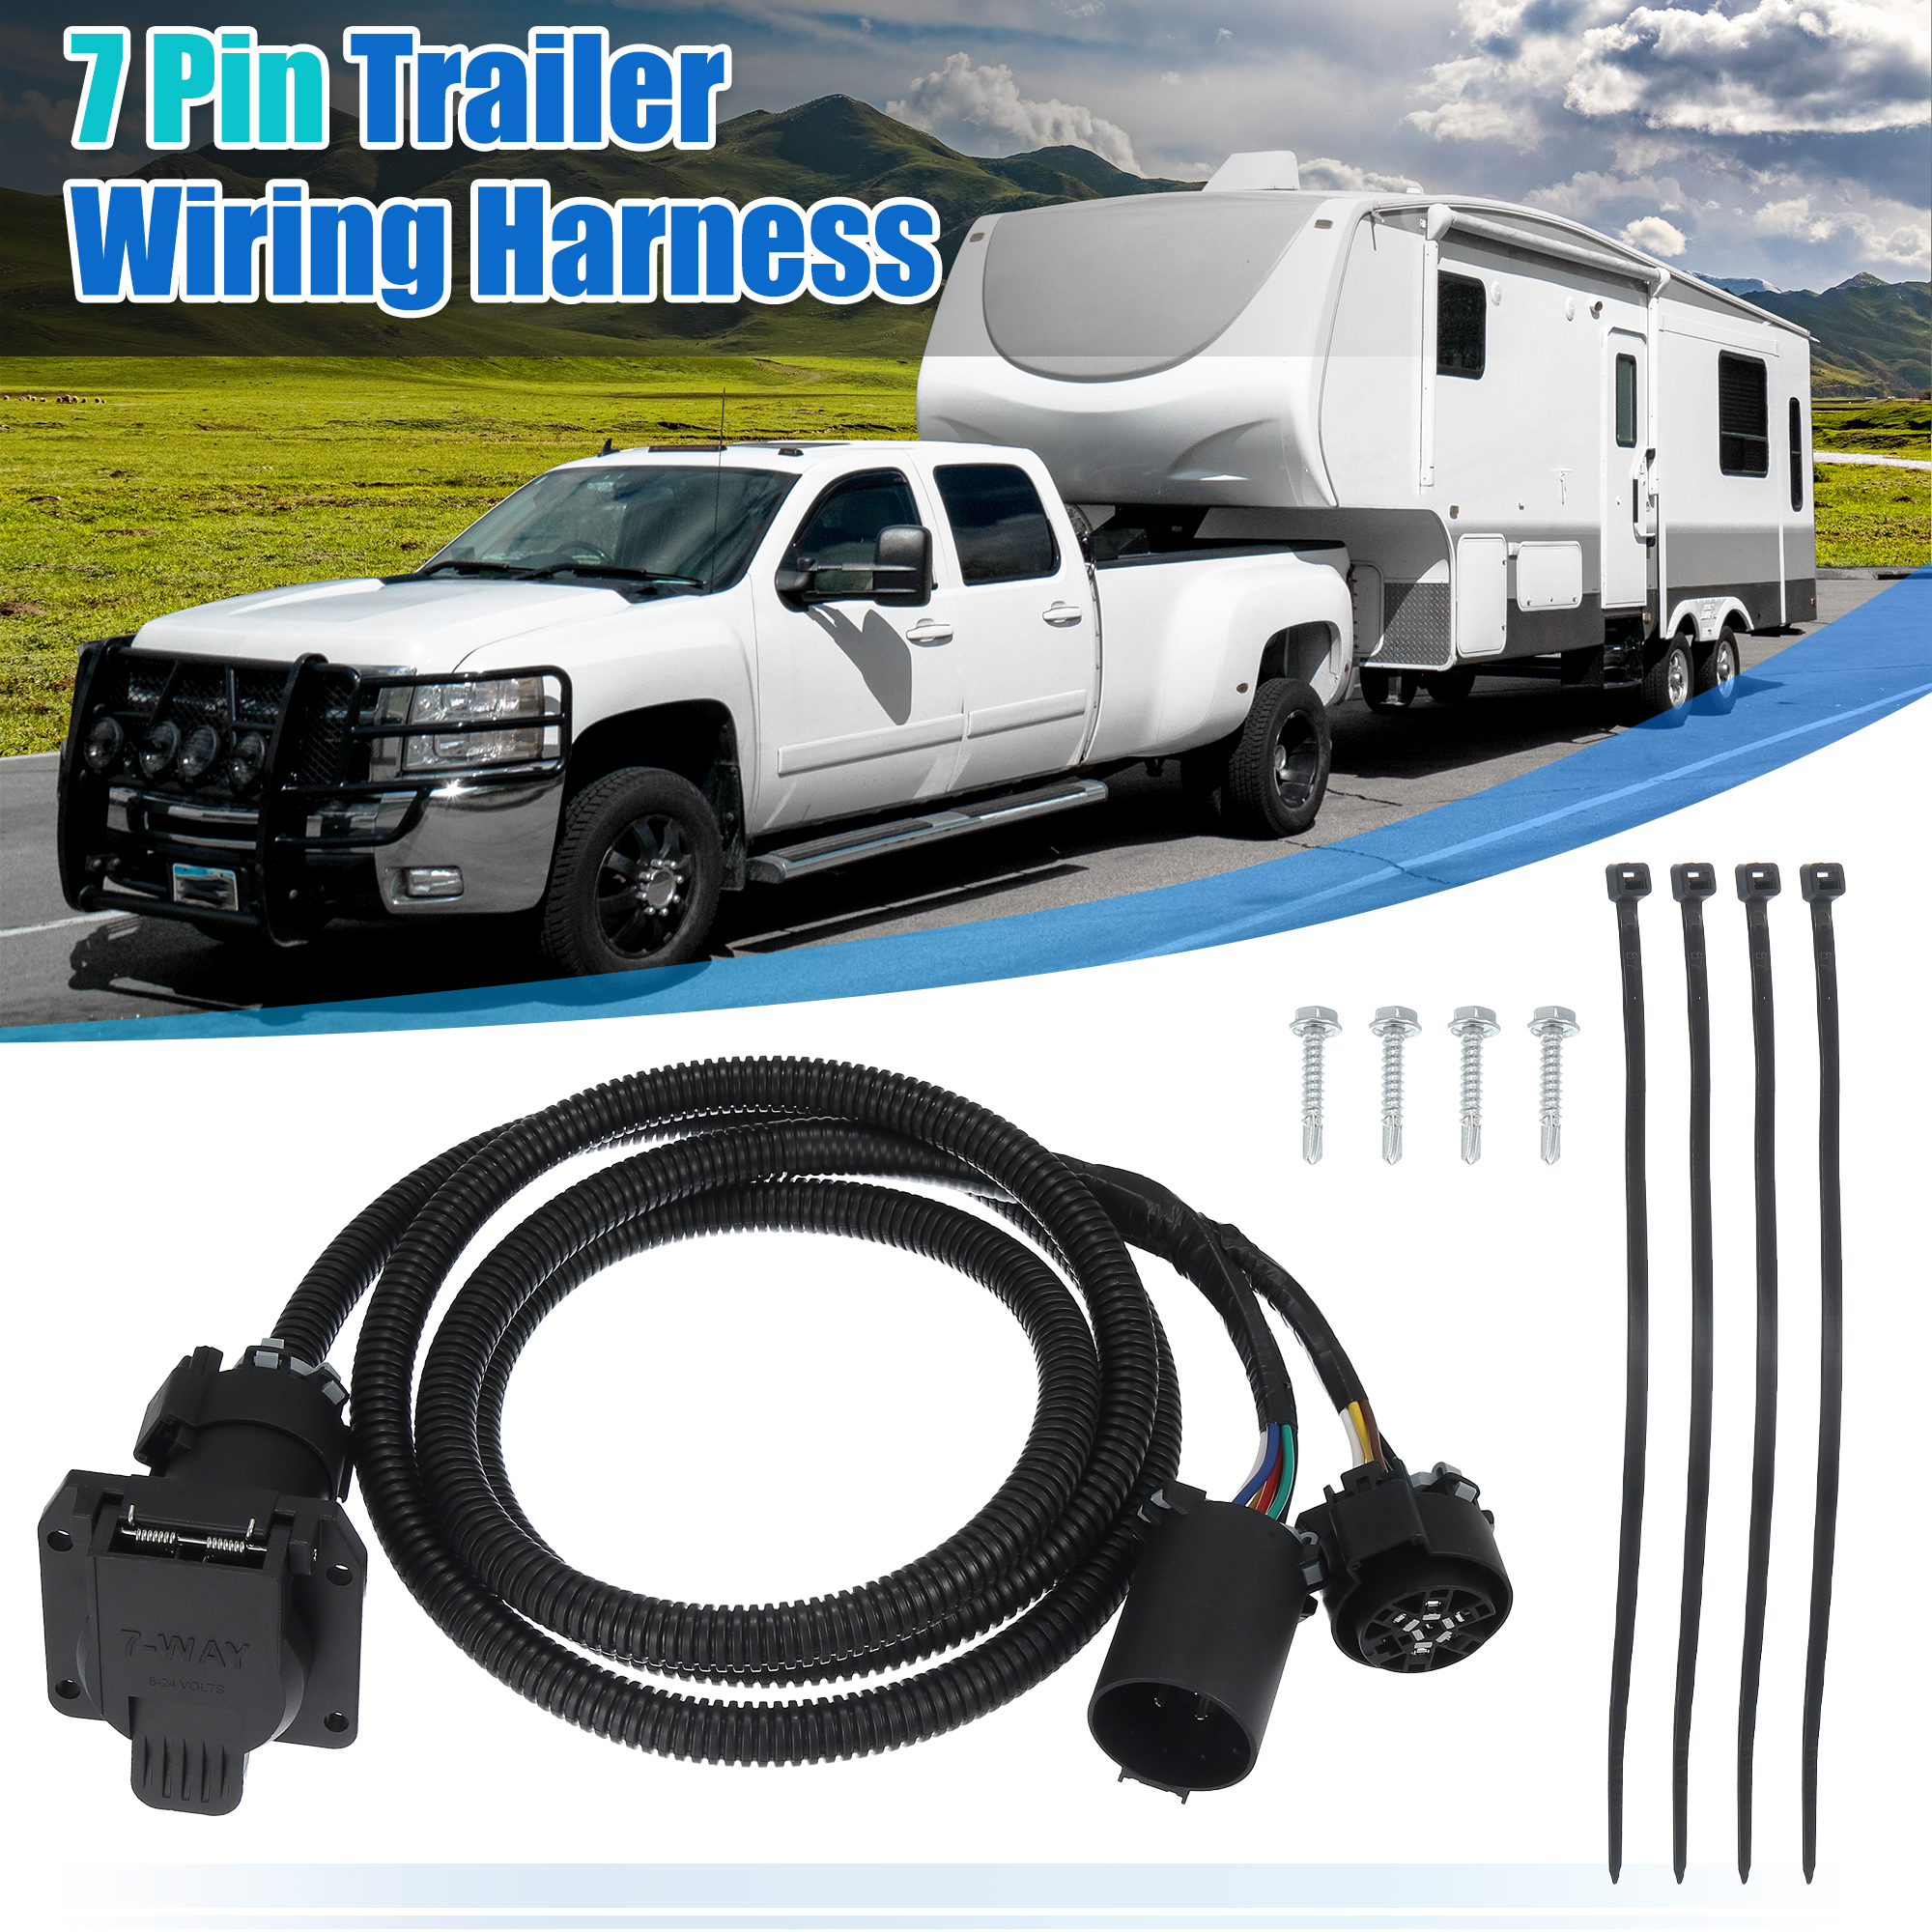 Unique Bargains 7 Pin Trailer Wiring Harness Extension Connectors Truck Bed 7 Way RV Wiring Plug